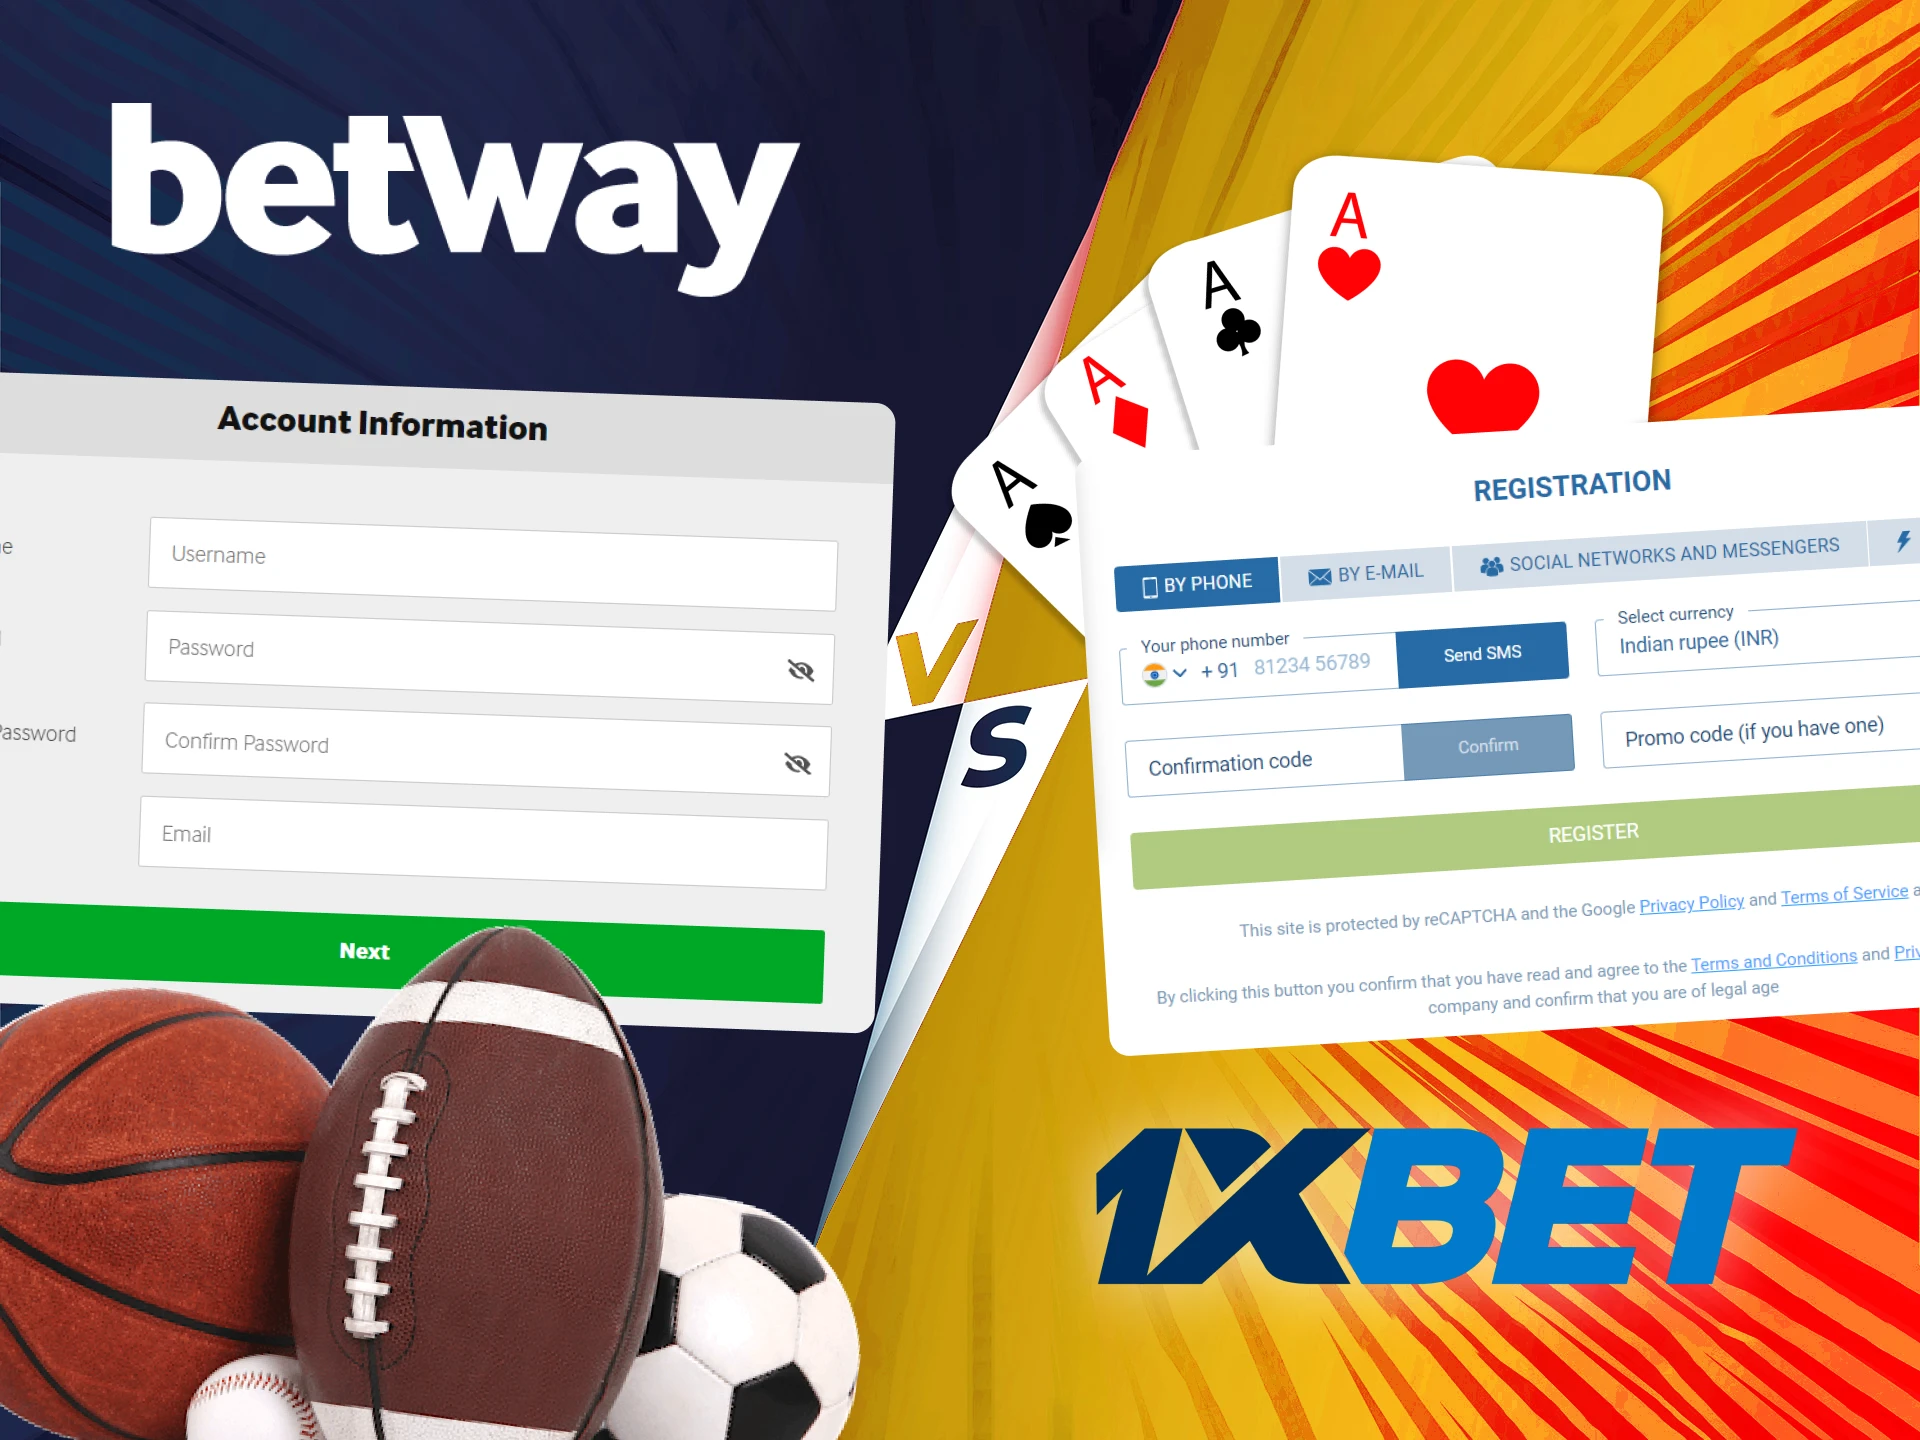 Register on Betway and 1xbet to find out who is better.